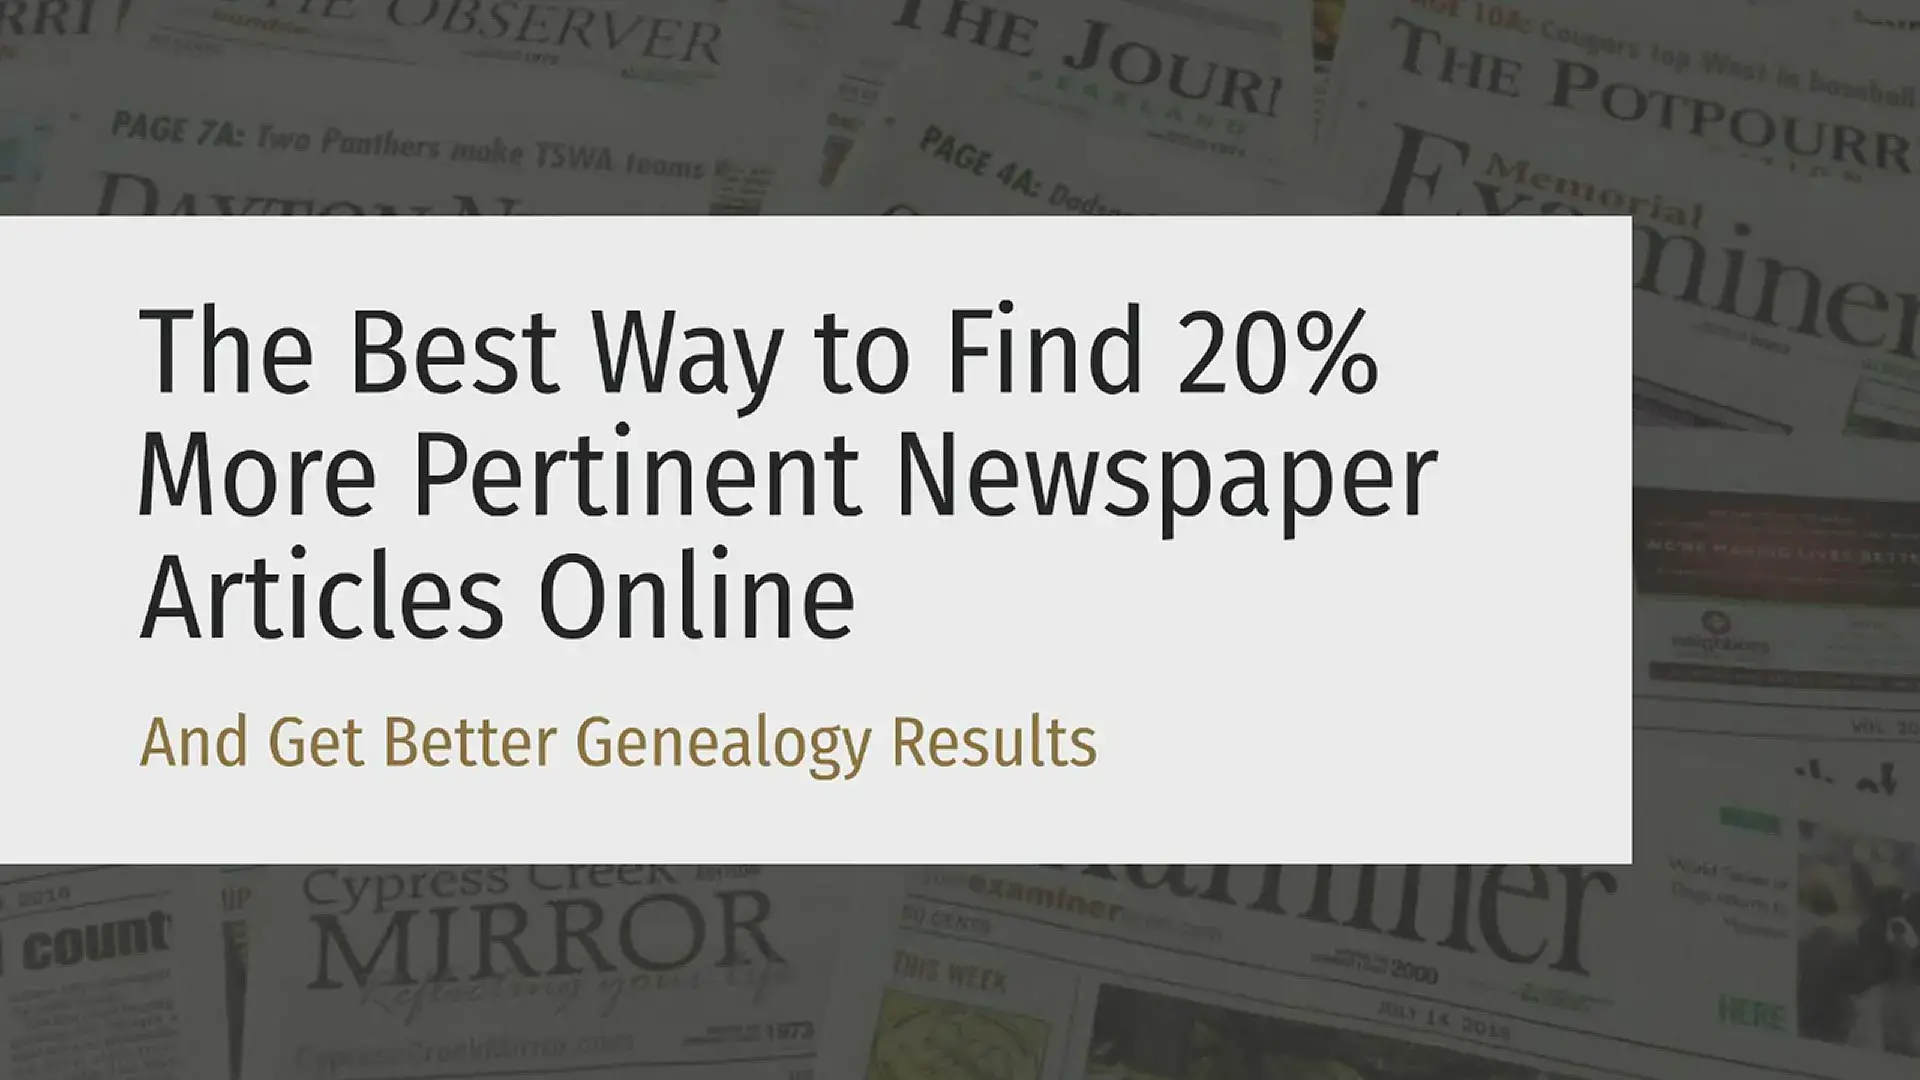 'Video thumbnail for The Best Way to Find 20% More Pertinent Newspaper Articles Online'